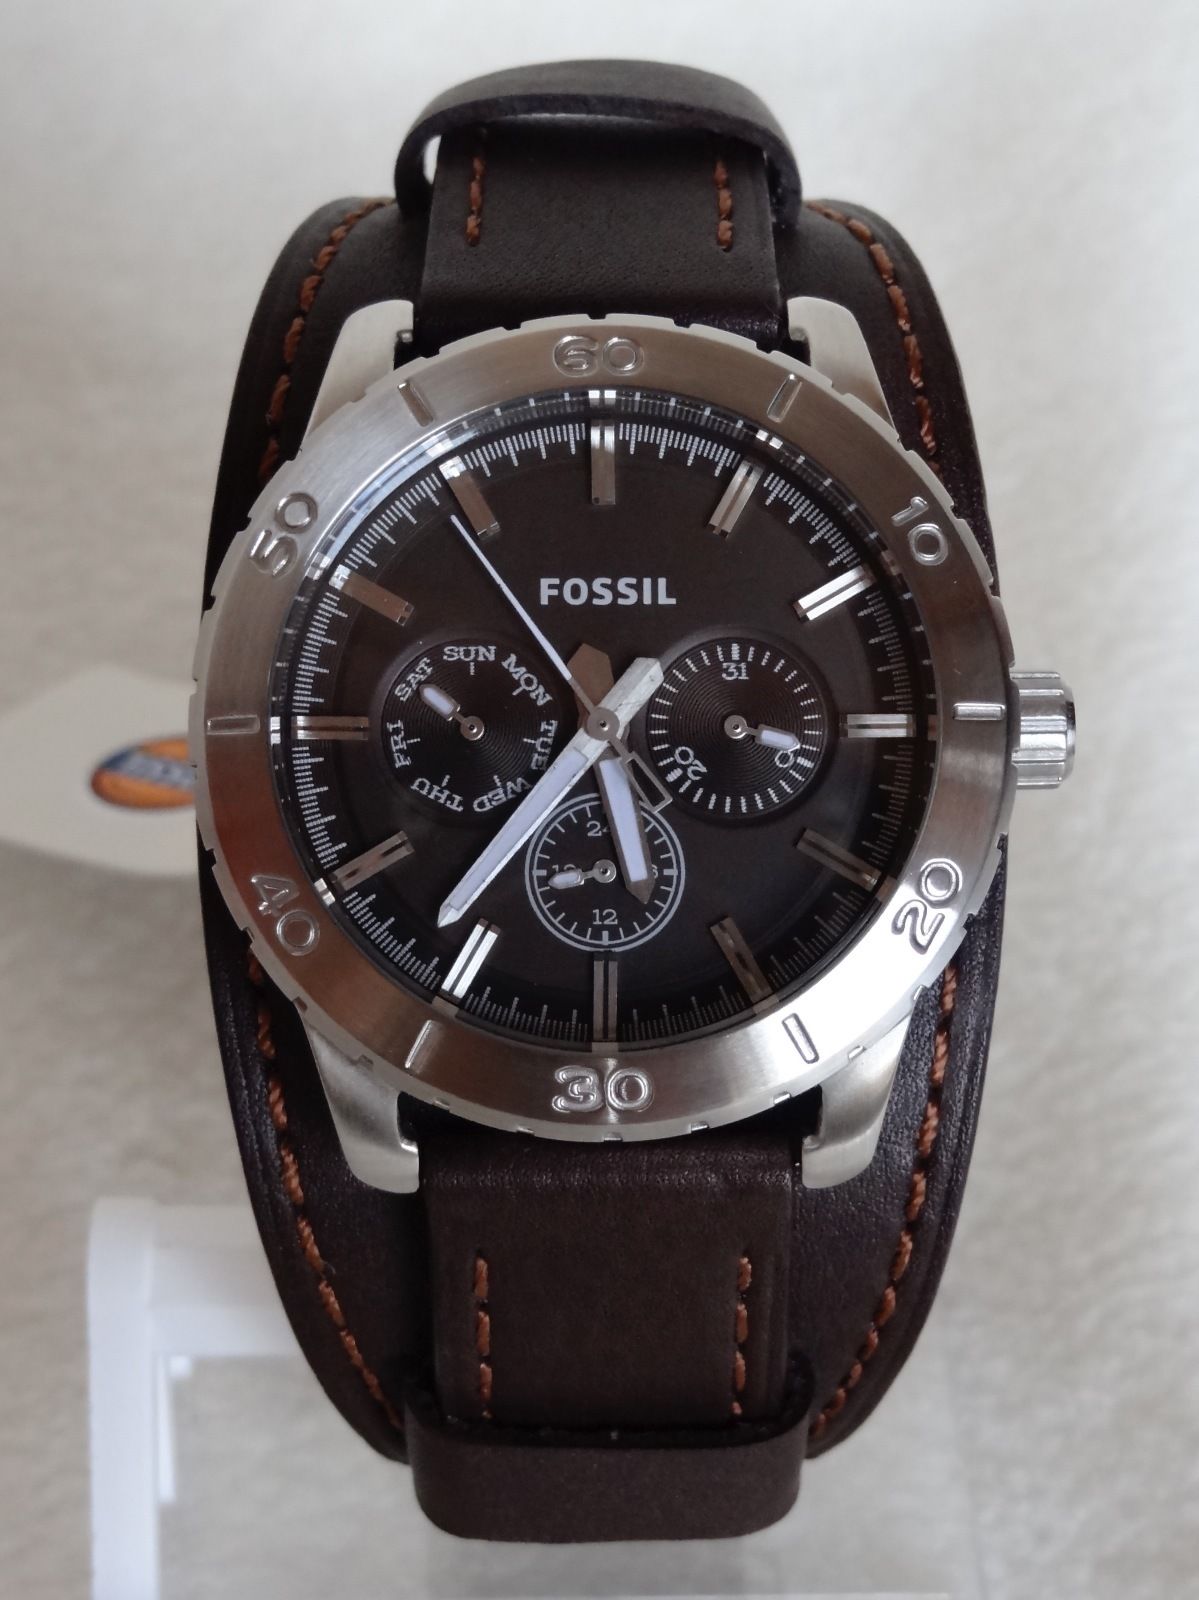 USA Boutique: Fossil Chronograph Leather Watch Analog with Day & Date ...